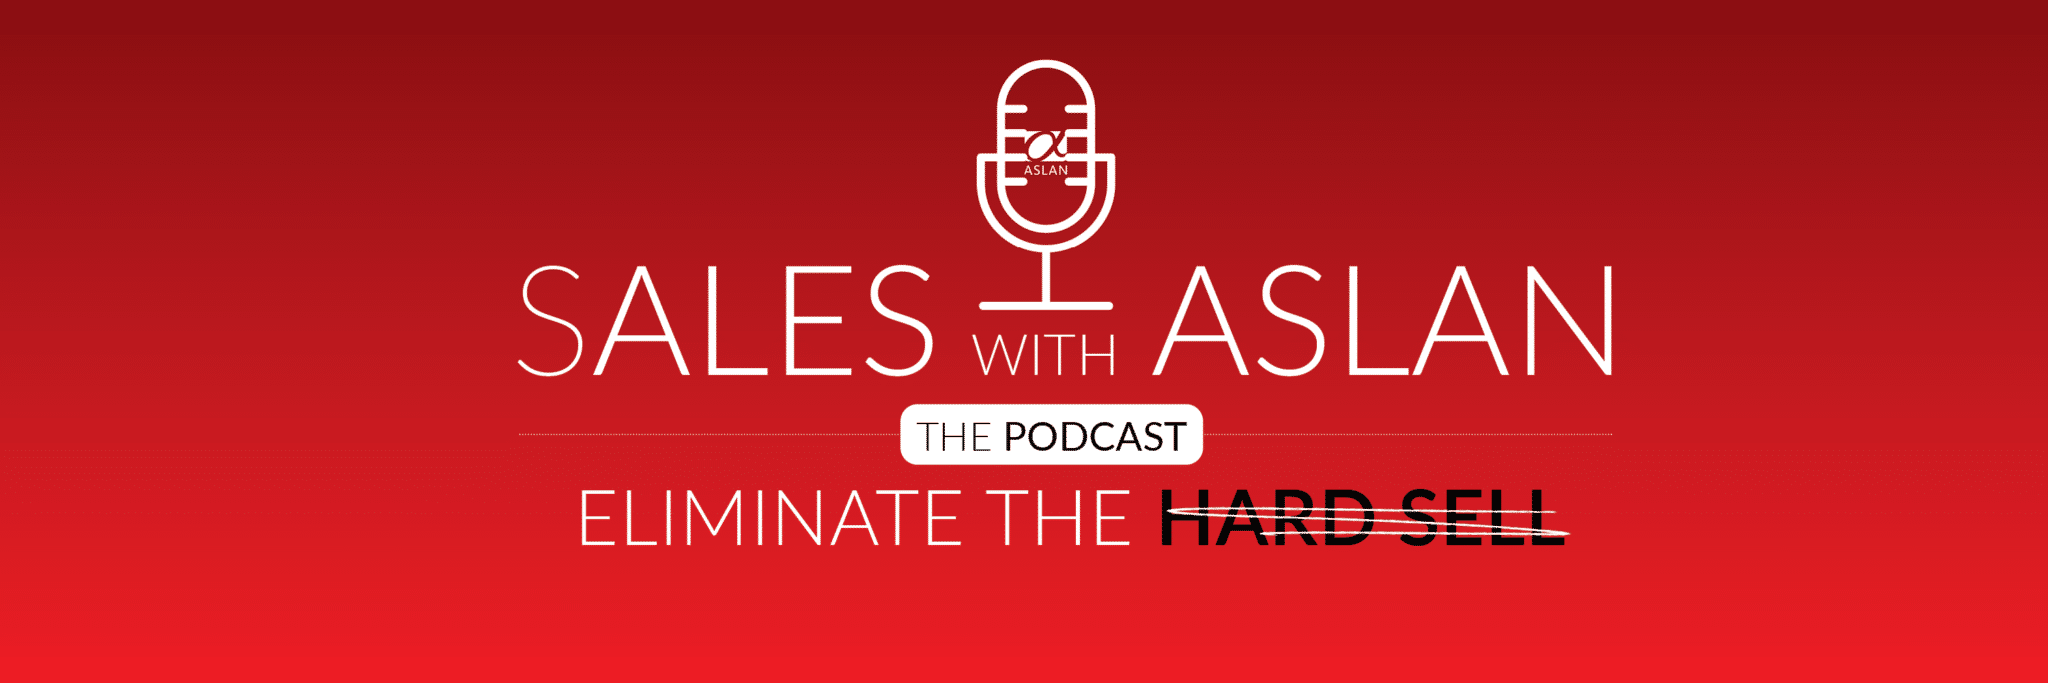 In this episode, Tom and Tab continue their discussion from last week’s episode on how to nail your next sales presentation. What can we do to set ourselves up for success? What can we do to minimize failure?  Our hosts unpack items 3, 4, and 5 on their pre-presentation checklist, continuing to offer up tangible tactics for how to master your presentation, manage your time, and advance the opportunity that’s on the line.